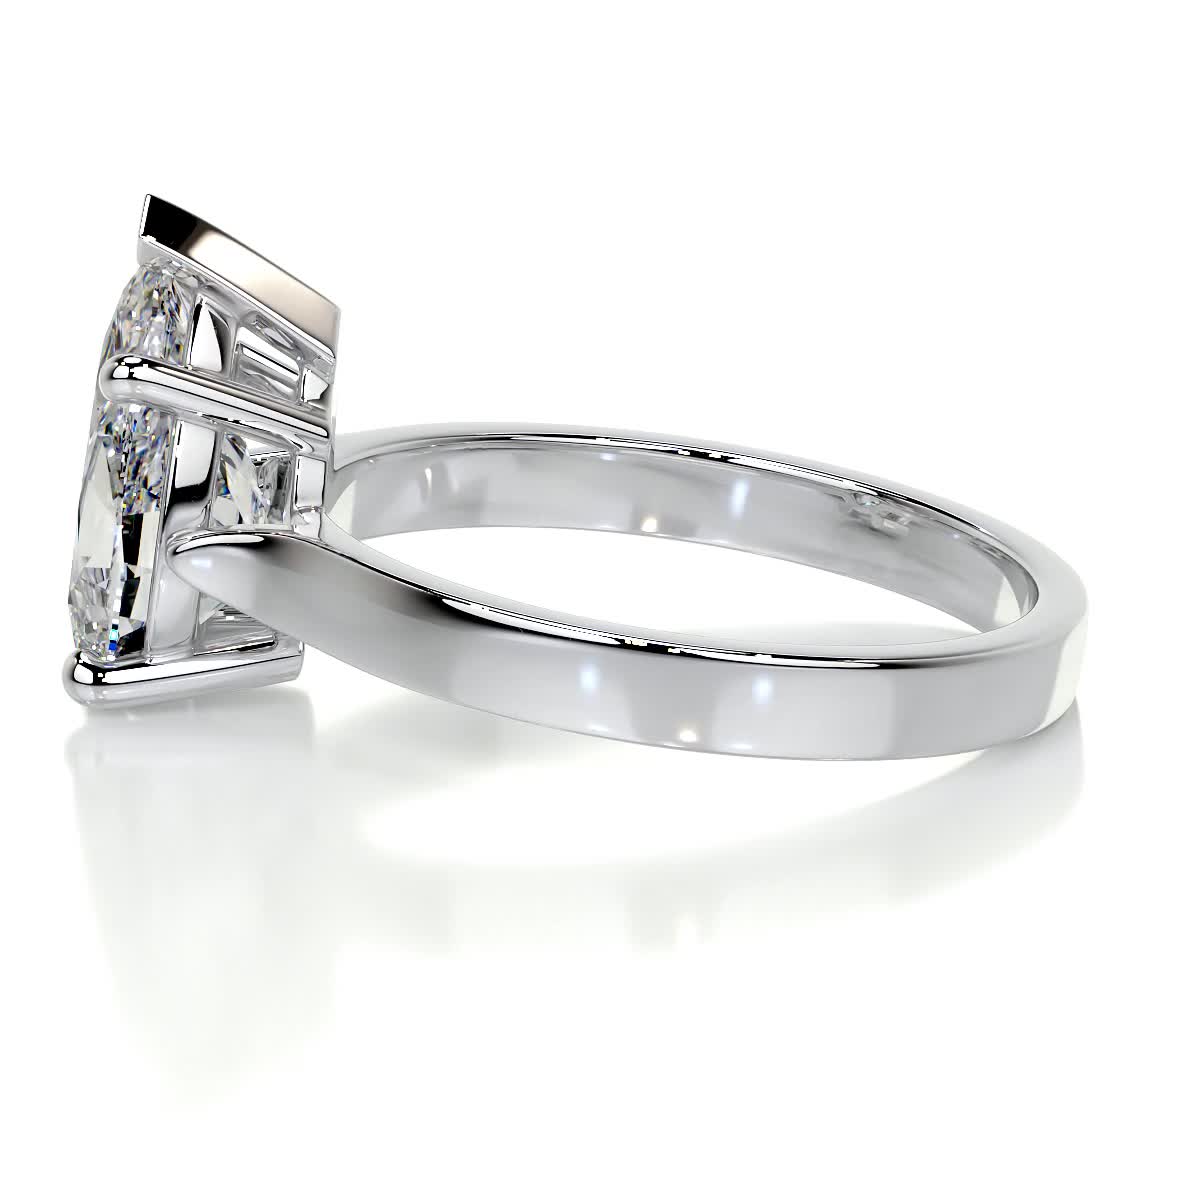 2.0 CT Round Solitaire CVD E/VS2 Diamond Engagement Ring 33